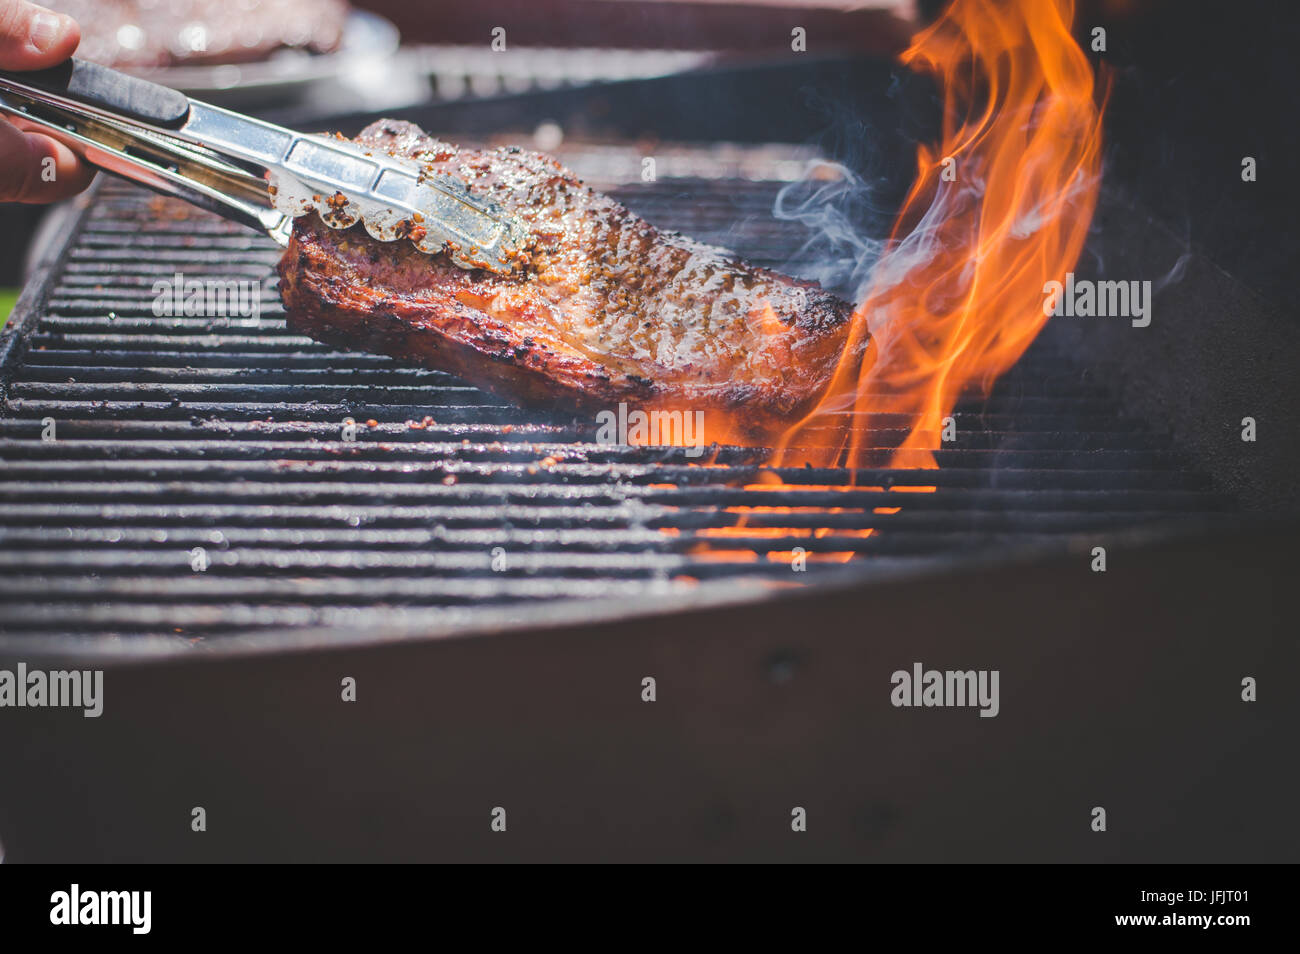 Steaks cooking on a grill with flame coming up around the steaks. Stock Photo